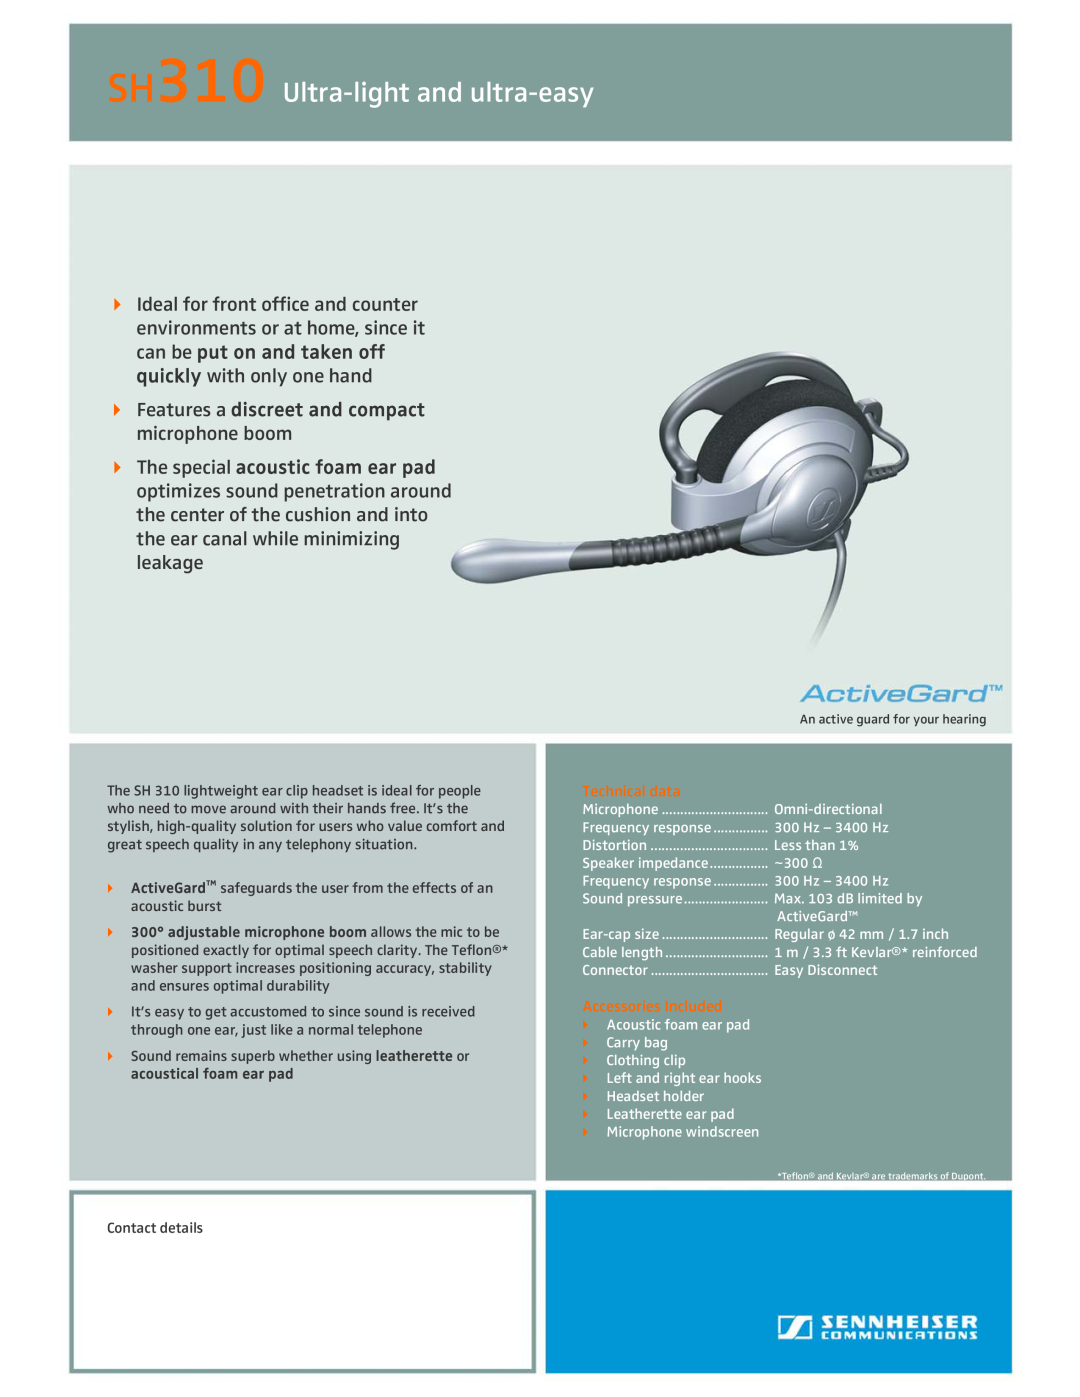 Sennheiser manual SH310 Ultra-lightand ultra-easy, Features a discreet and compact microphone boom, Technical data 